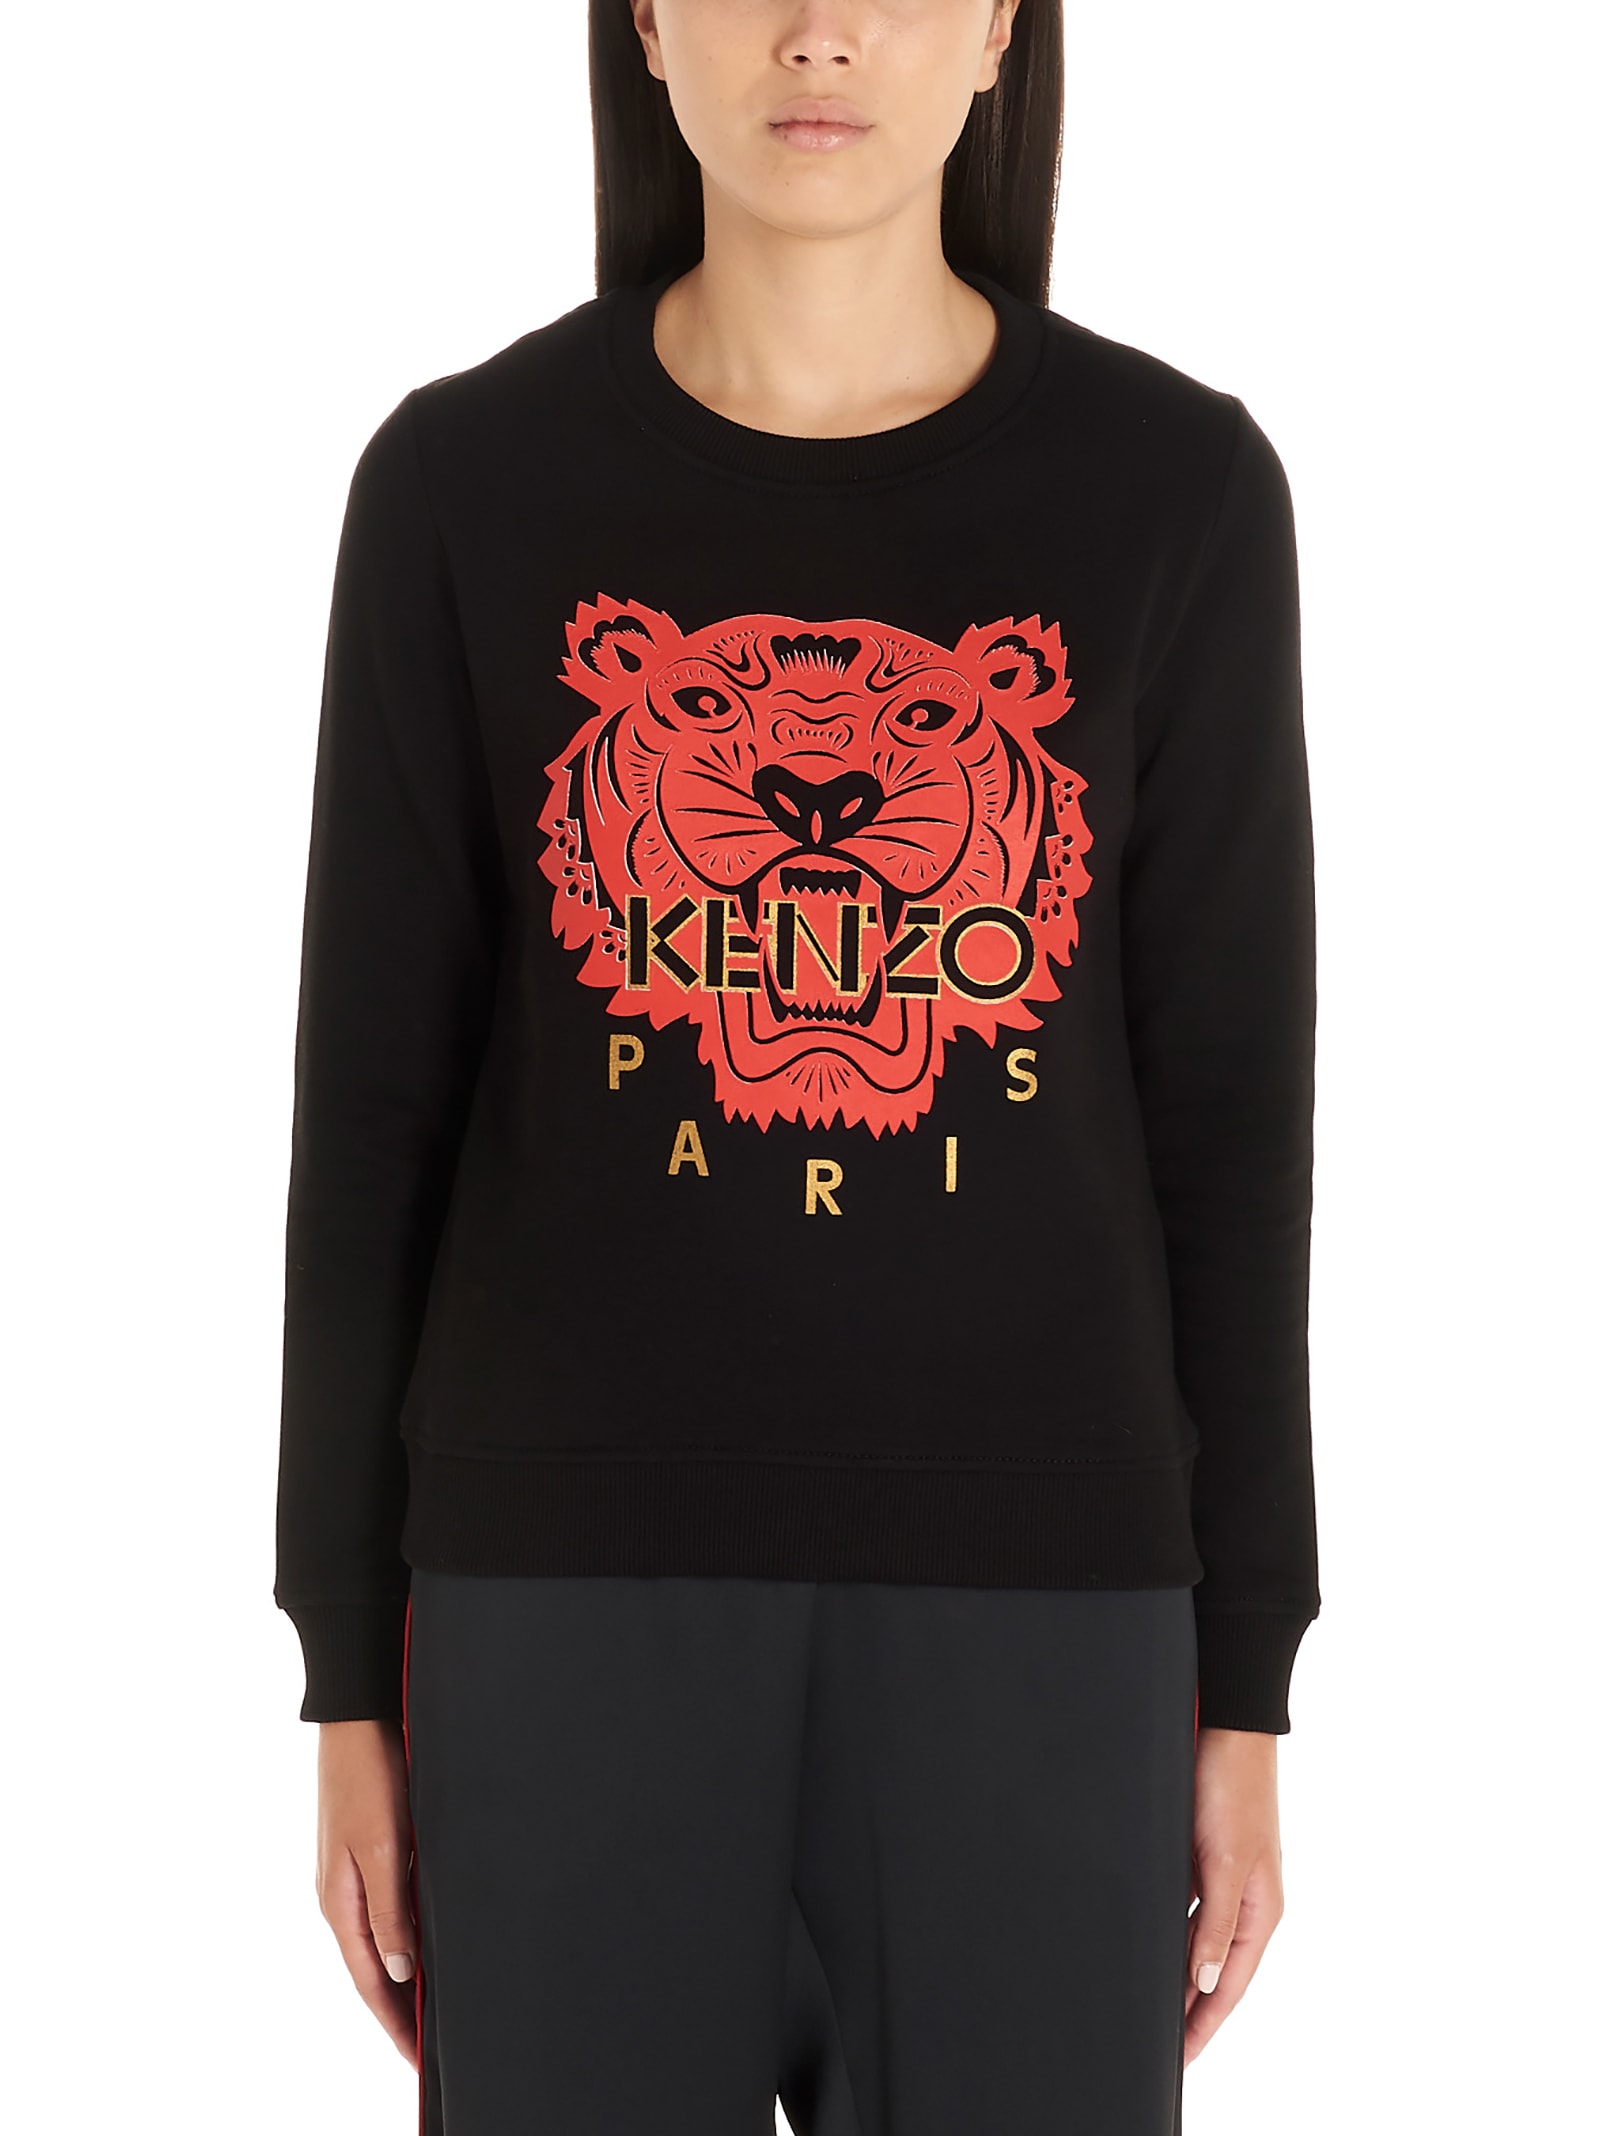 black and red kenzo jumper